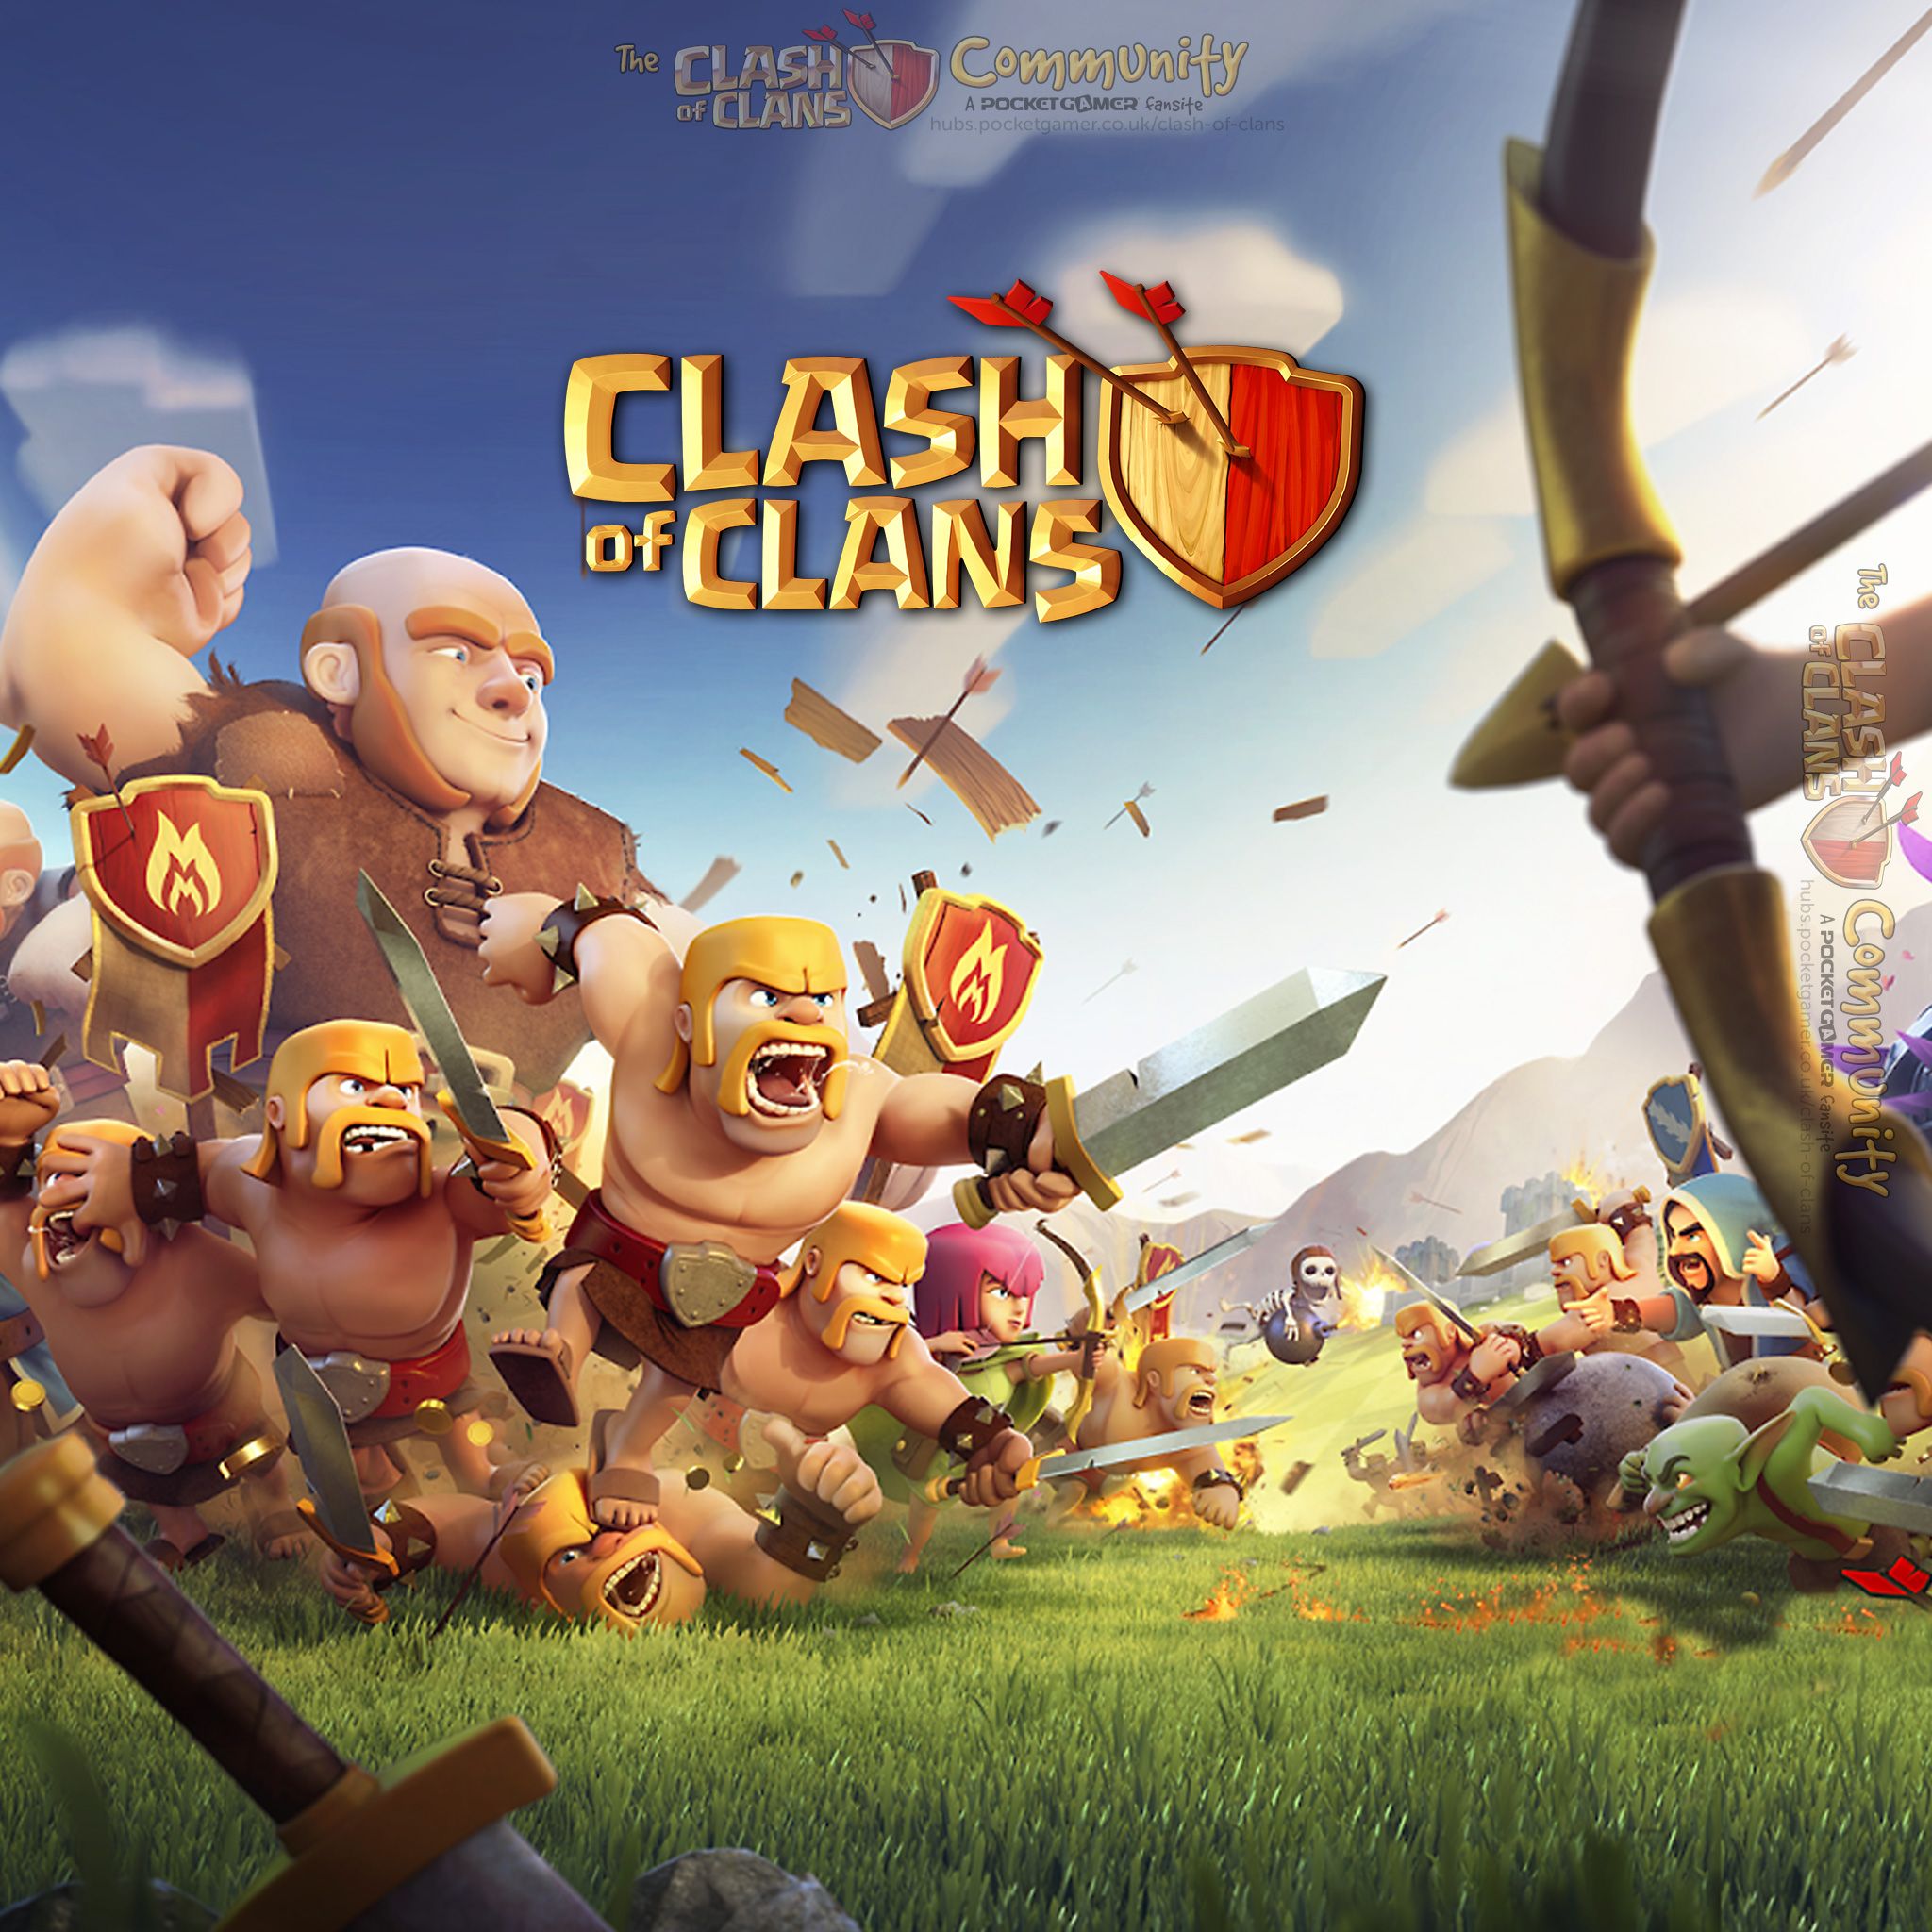 Clash of Clans Awesome Background. Awesome Wallpaper, Awesome Background and Awesome Minecraft Wallpaper